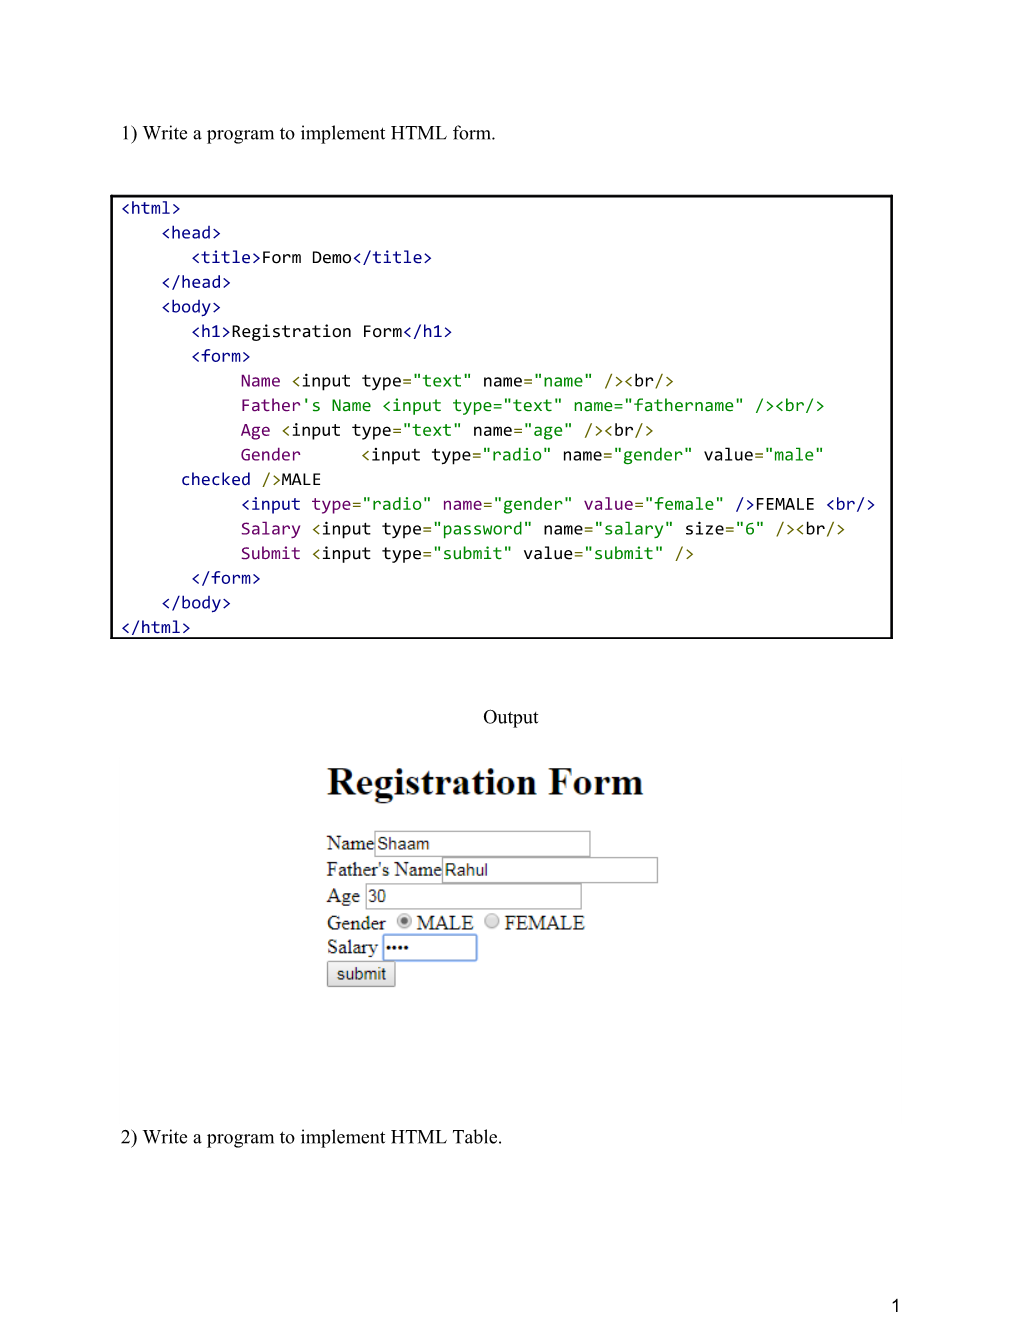 1) Write a Program to Implement HTML Form